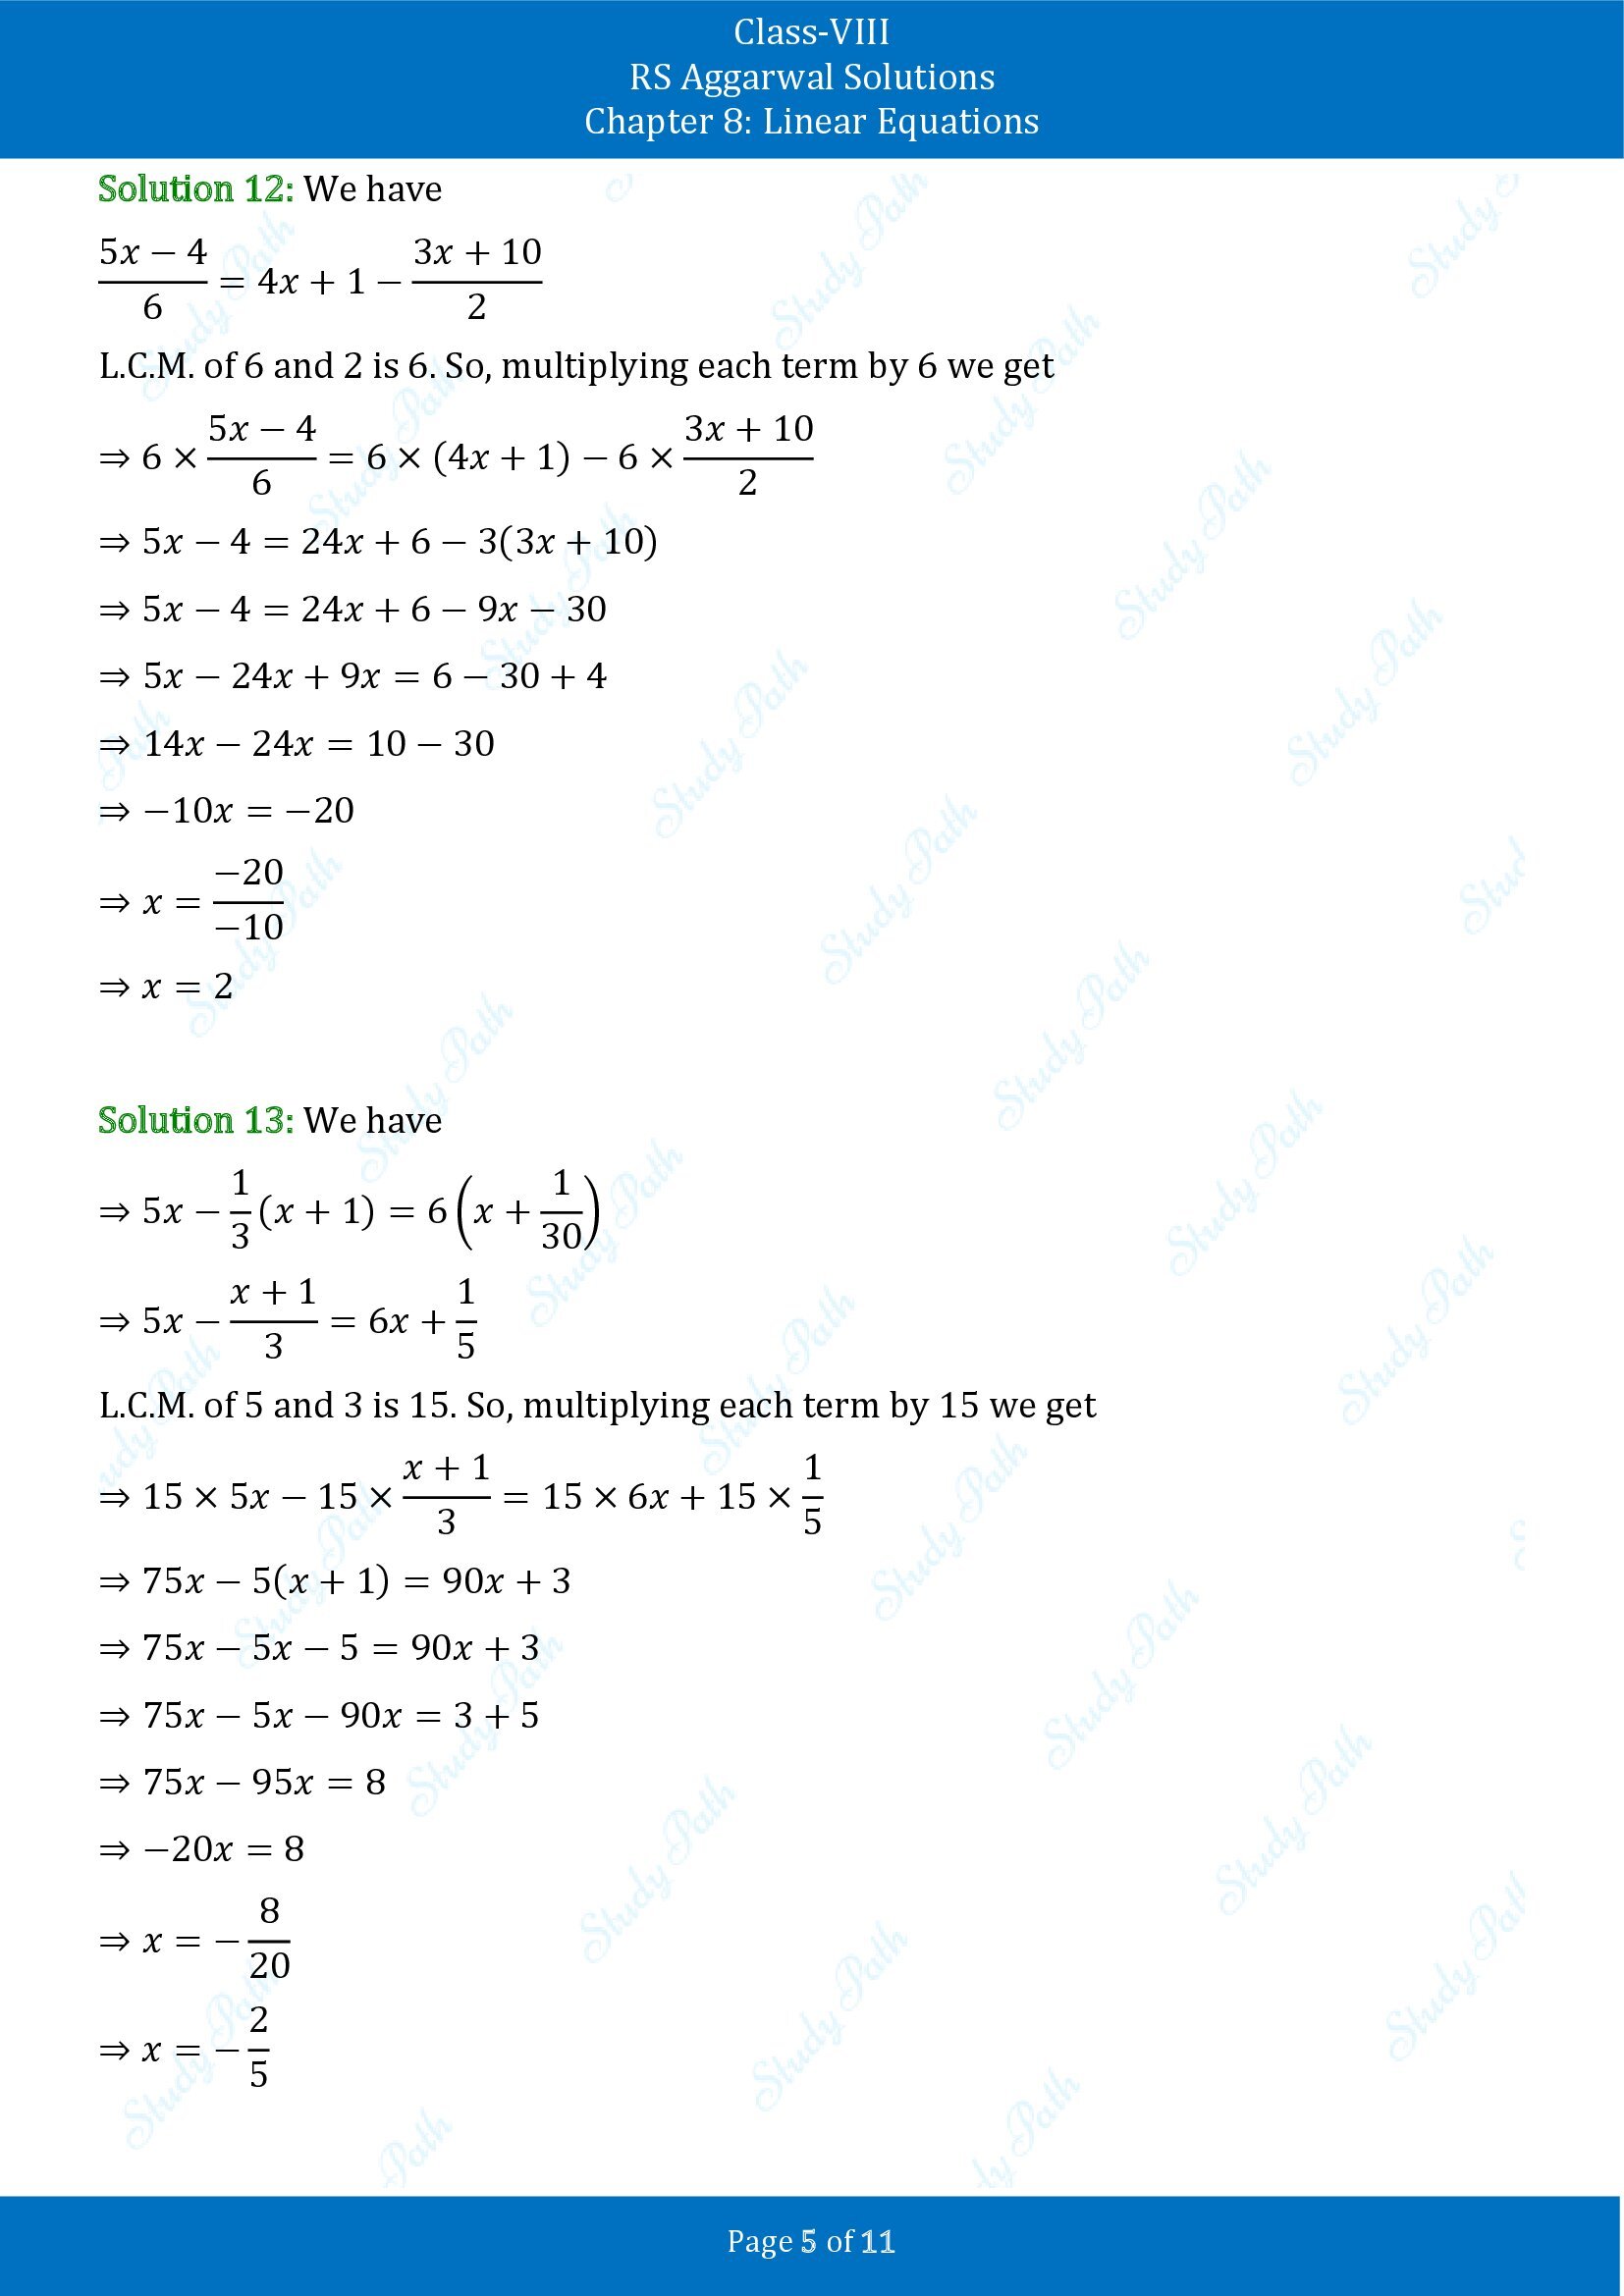 RS Aggarwal Solutions Class 8 Chapter 8 Linear Equations Exercise 8A 00005